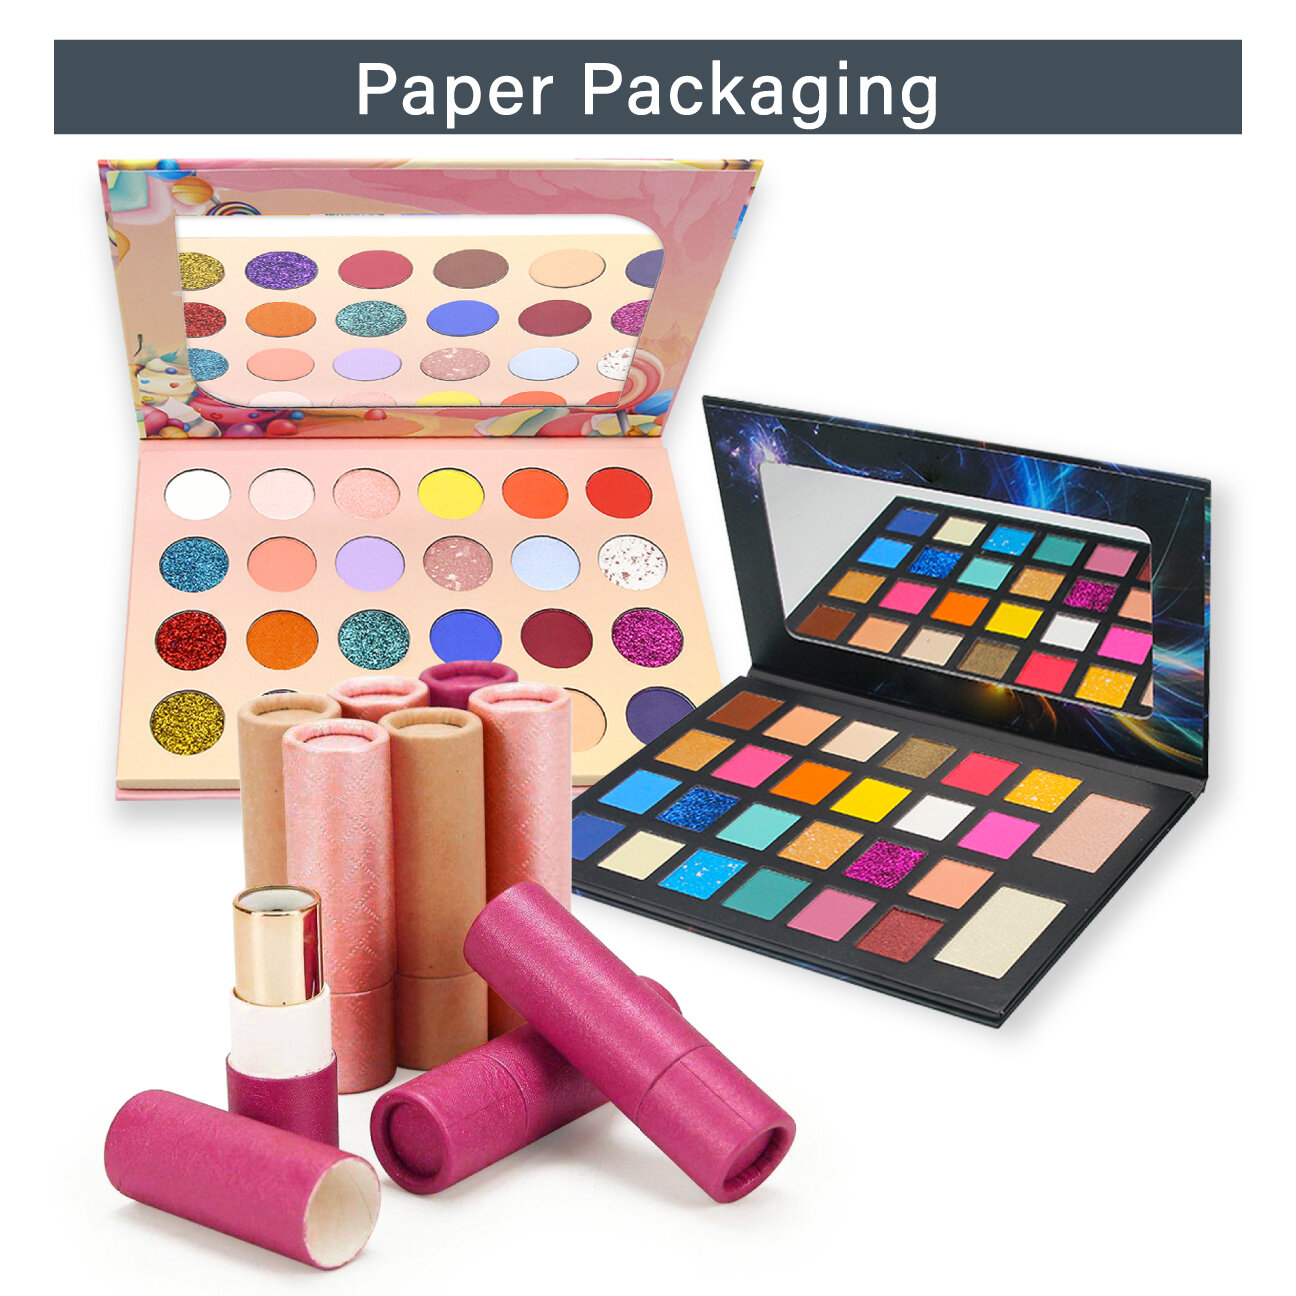 Packaging-Main-Page-Squares_paper.jpg